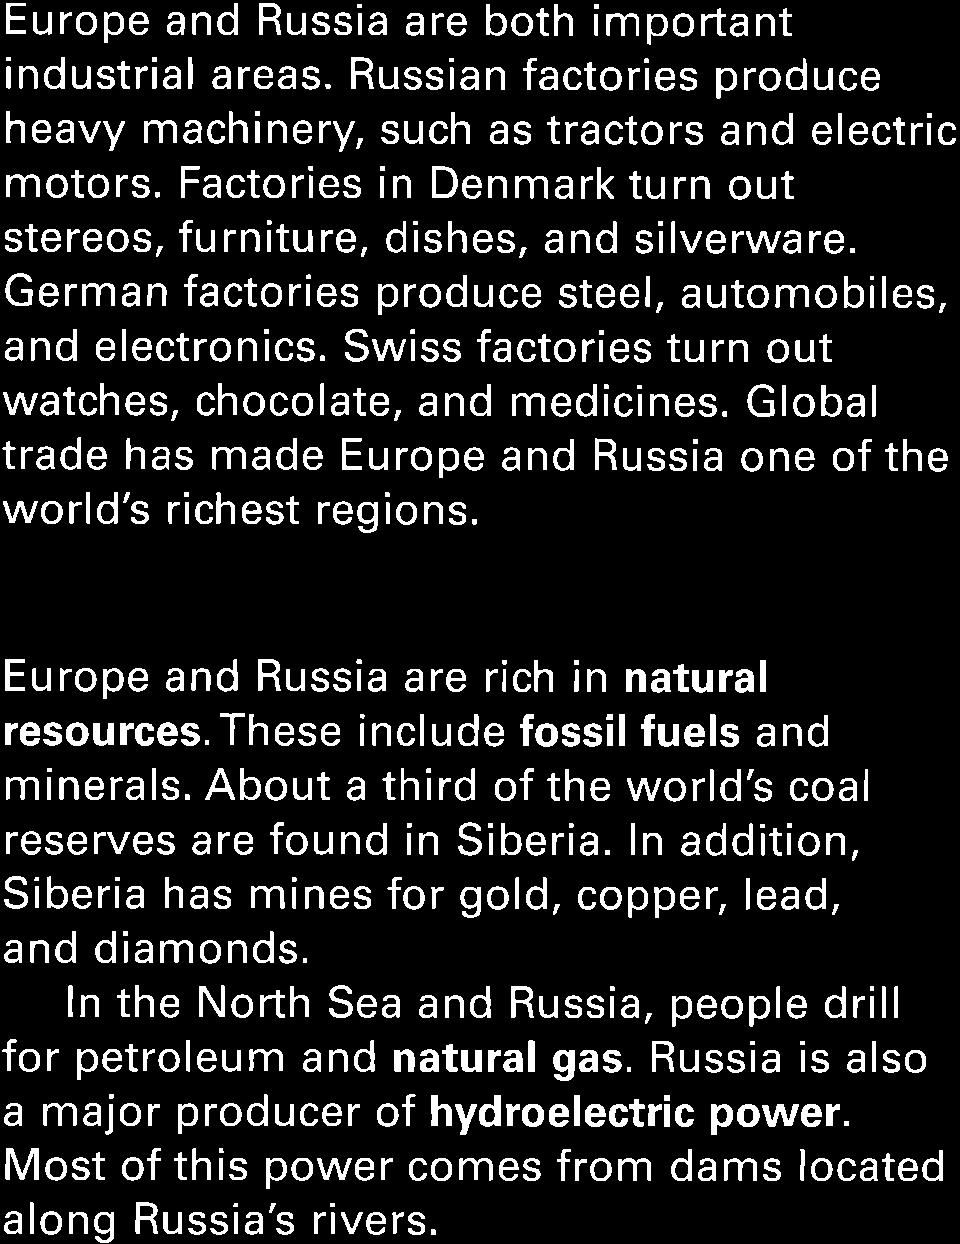 German factories produce steel, automobiles, and electronics. Swiss factories turn out watches, chocolate, and medicines. Global trade has made Europe and Russia one of the world's richest regions.